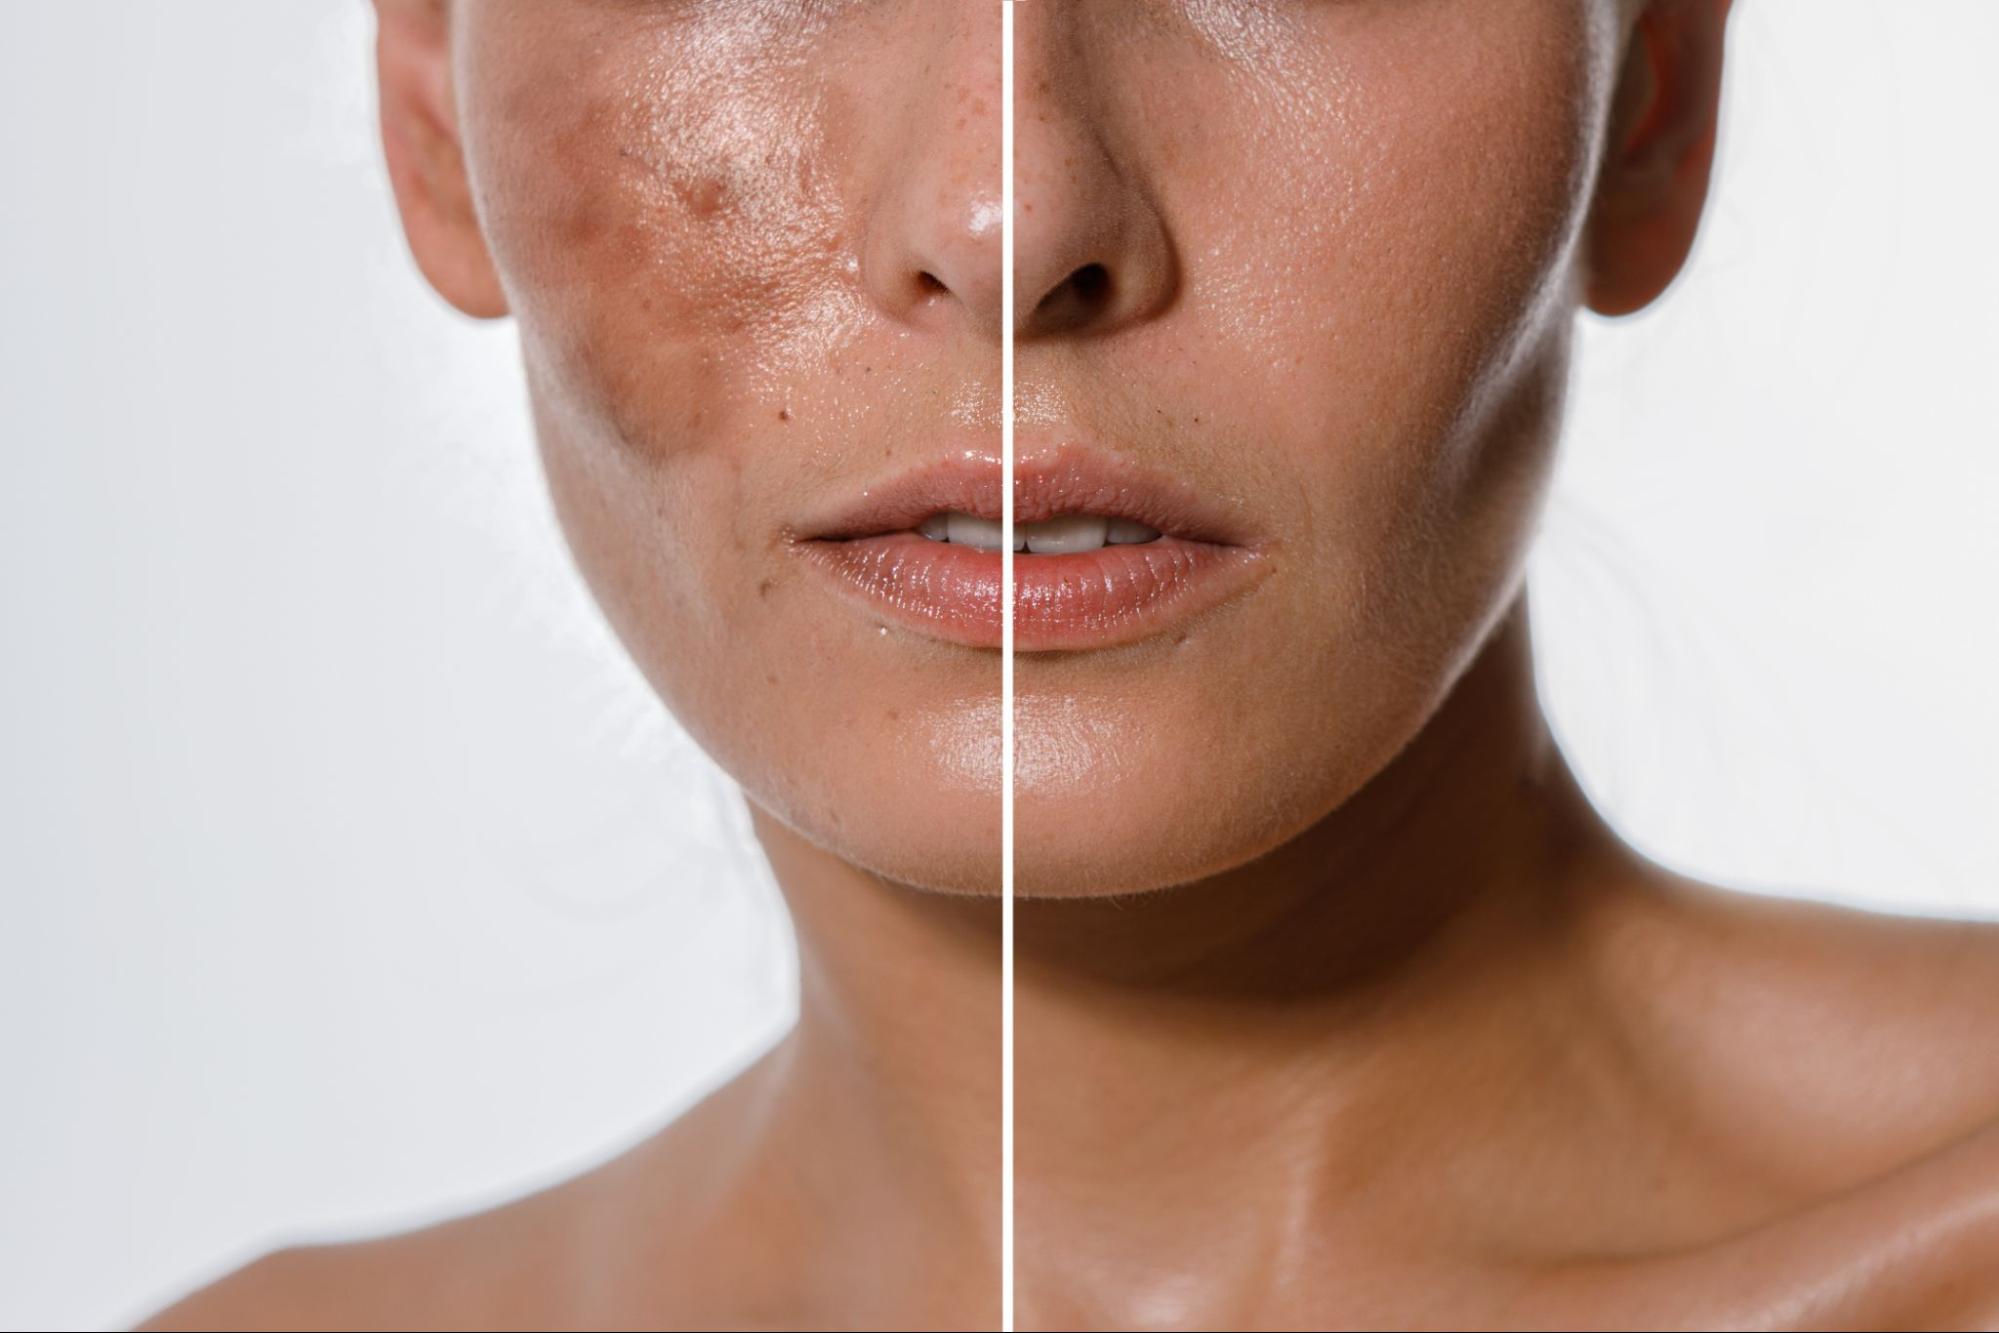 a before an after of pigmented skin to represent the effectiveness of pigmentation treatments